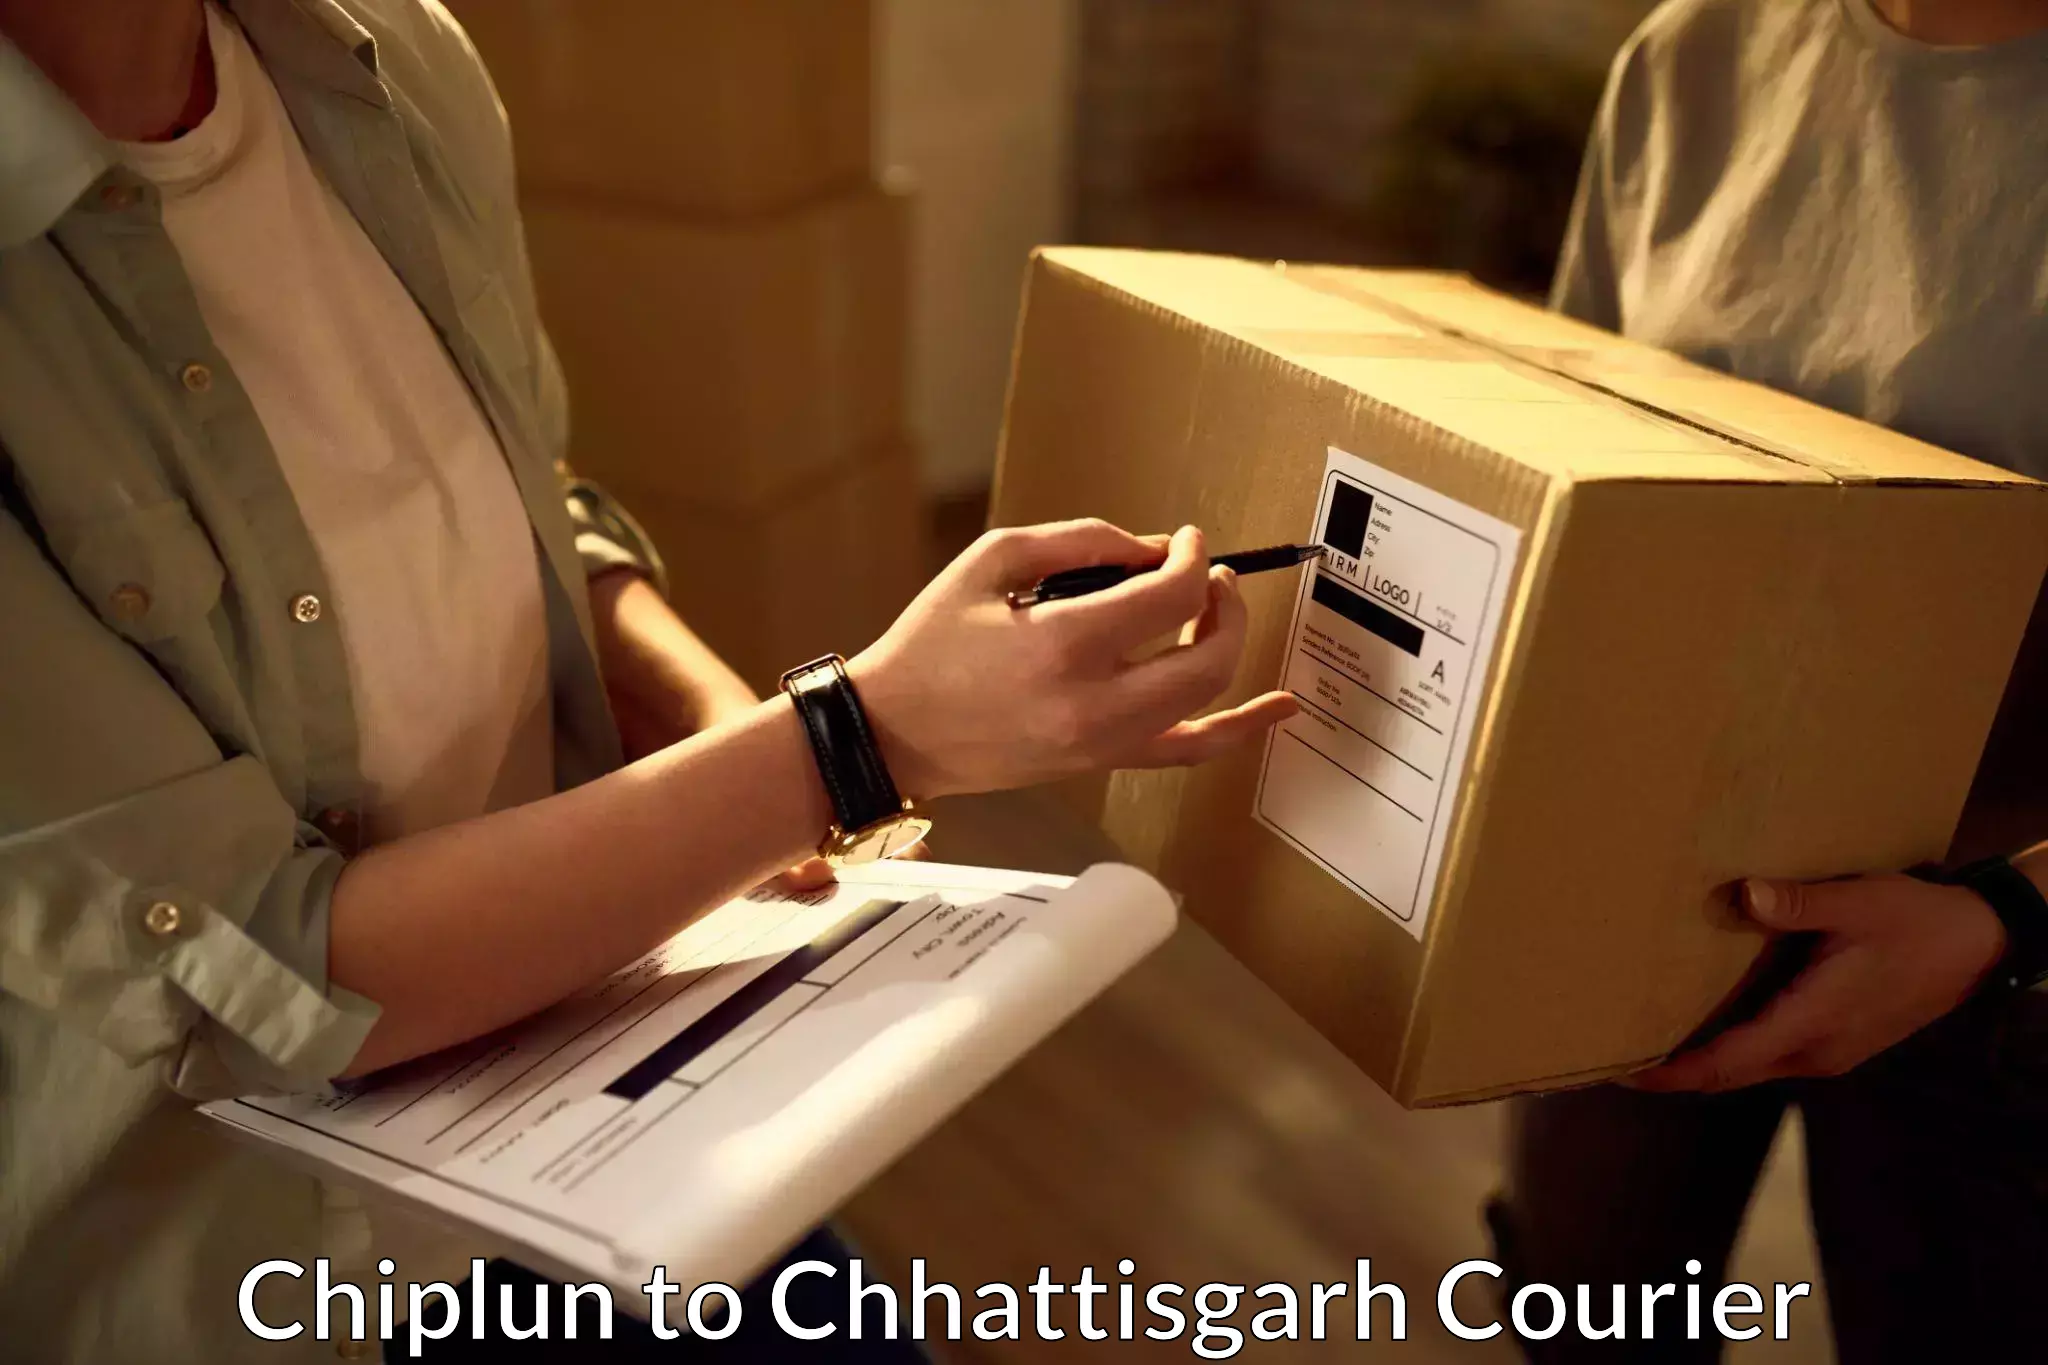 Nationwide delivery network Chiplun to Raipur